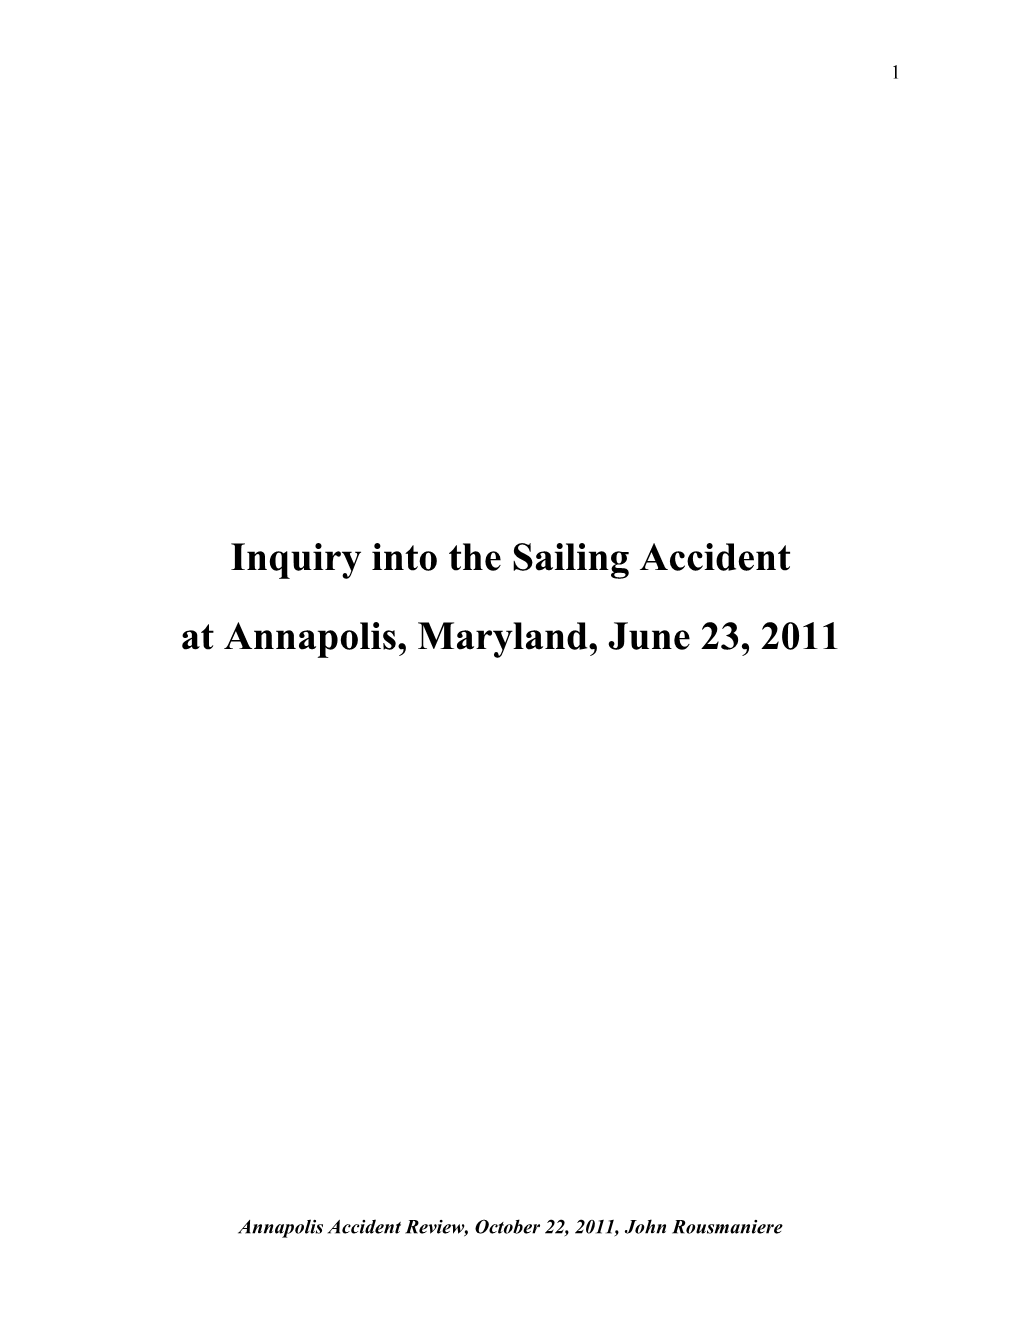 Inquiry Into the Sailing Accident at Annapolis, Maryland, June 23, 2011